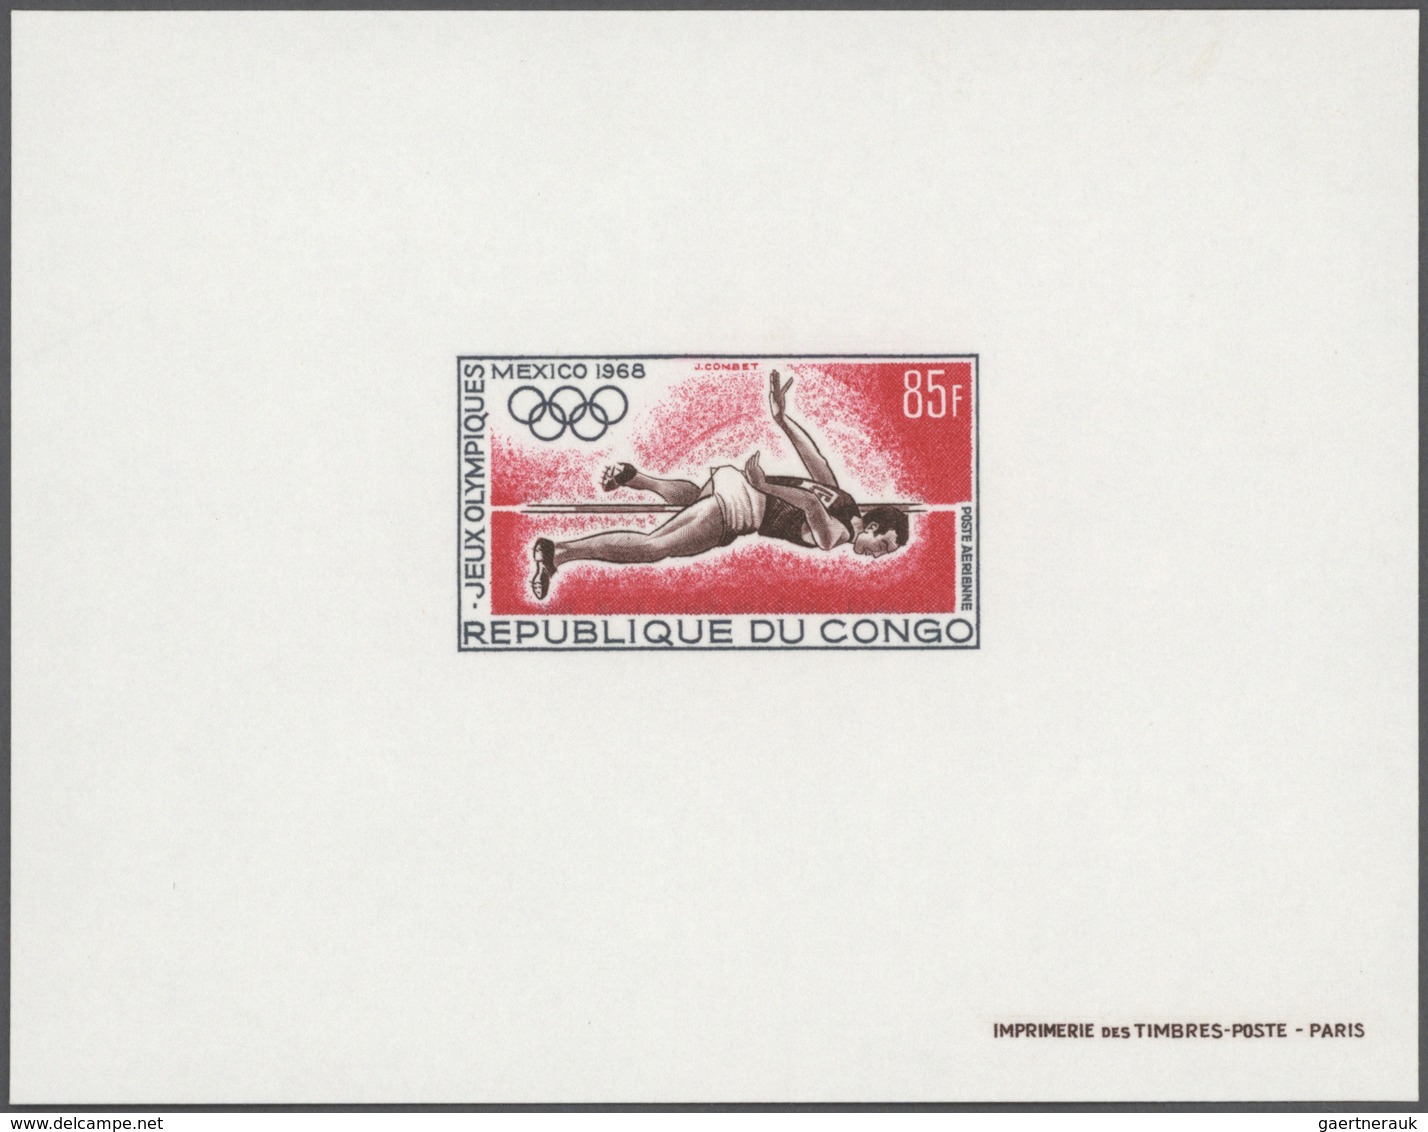 Thematik: Olympische Spiele / olympic games: 1968, Olympic Games Mexico, assortment of 25 epreuve de